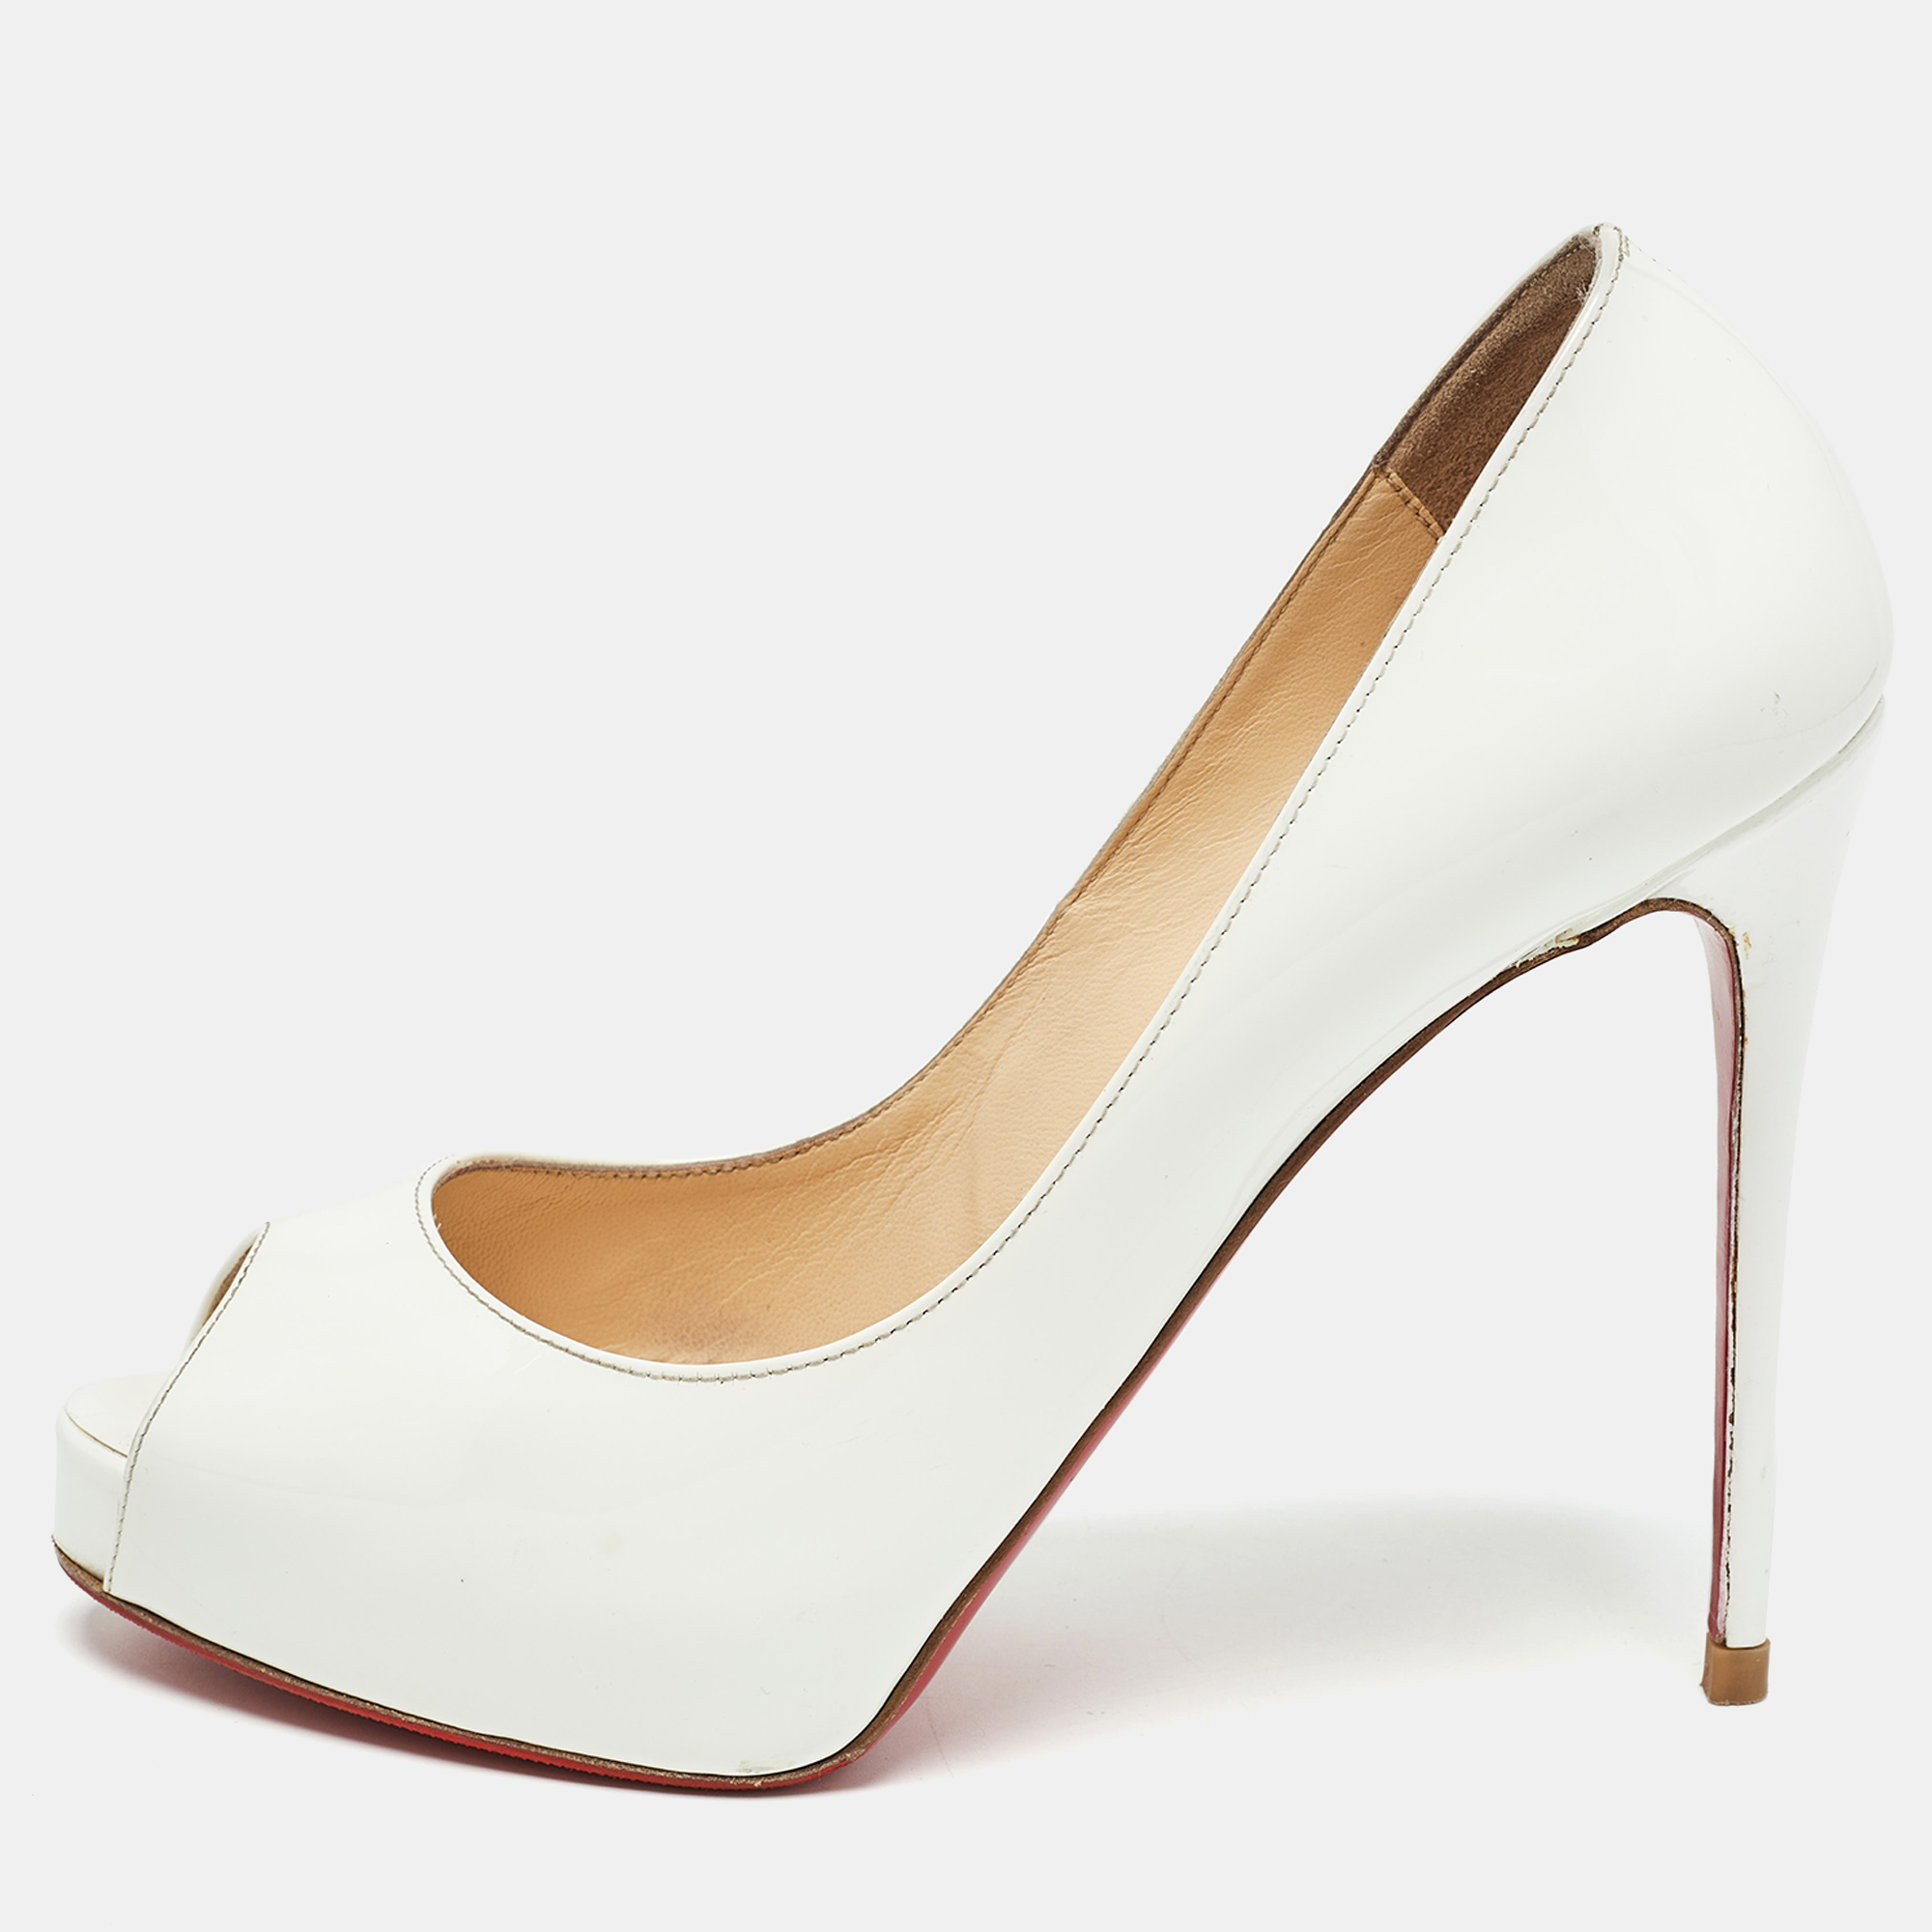 Christian louboutin white patent leather new very prive pumps size 37.5